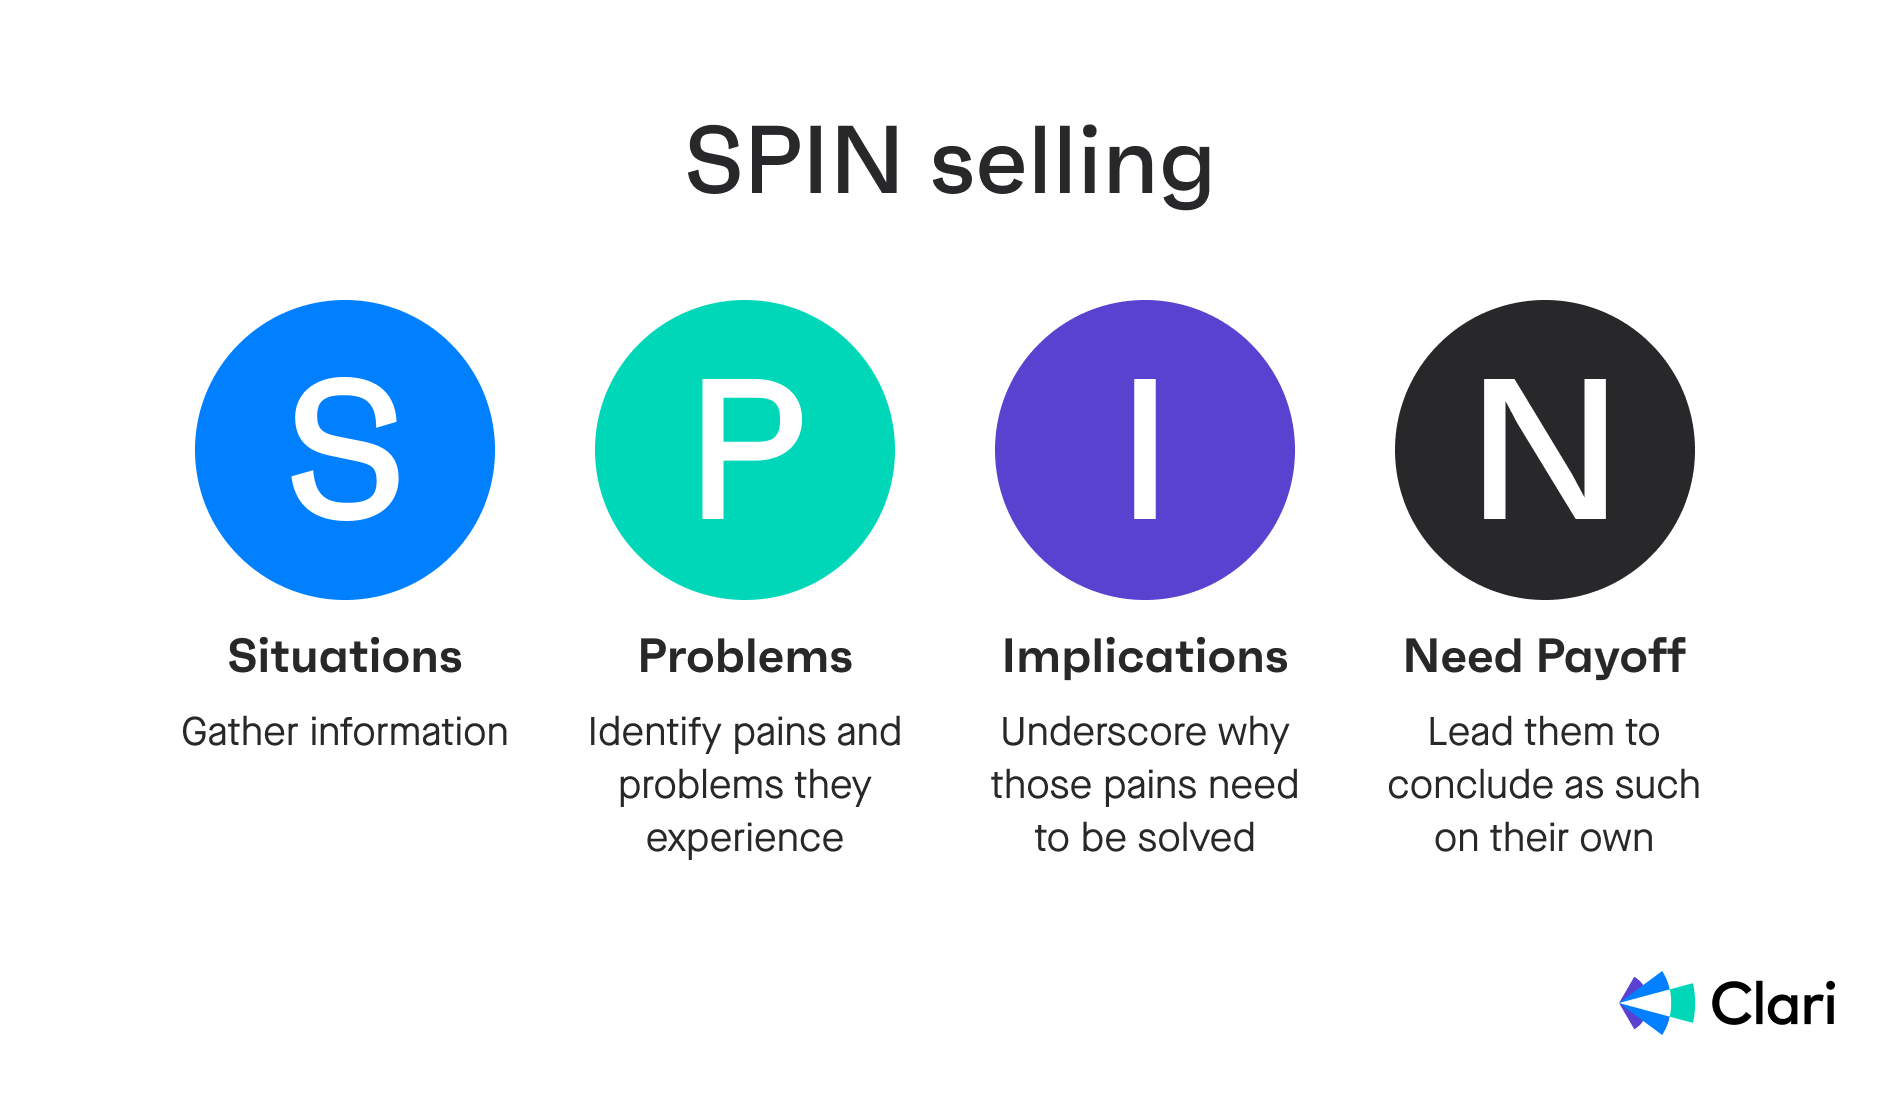 SPIN Selling: Unpacking the acronym